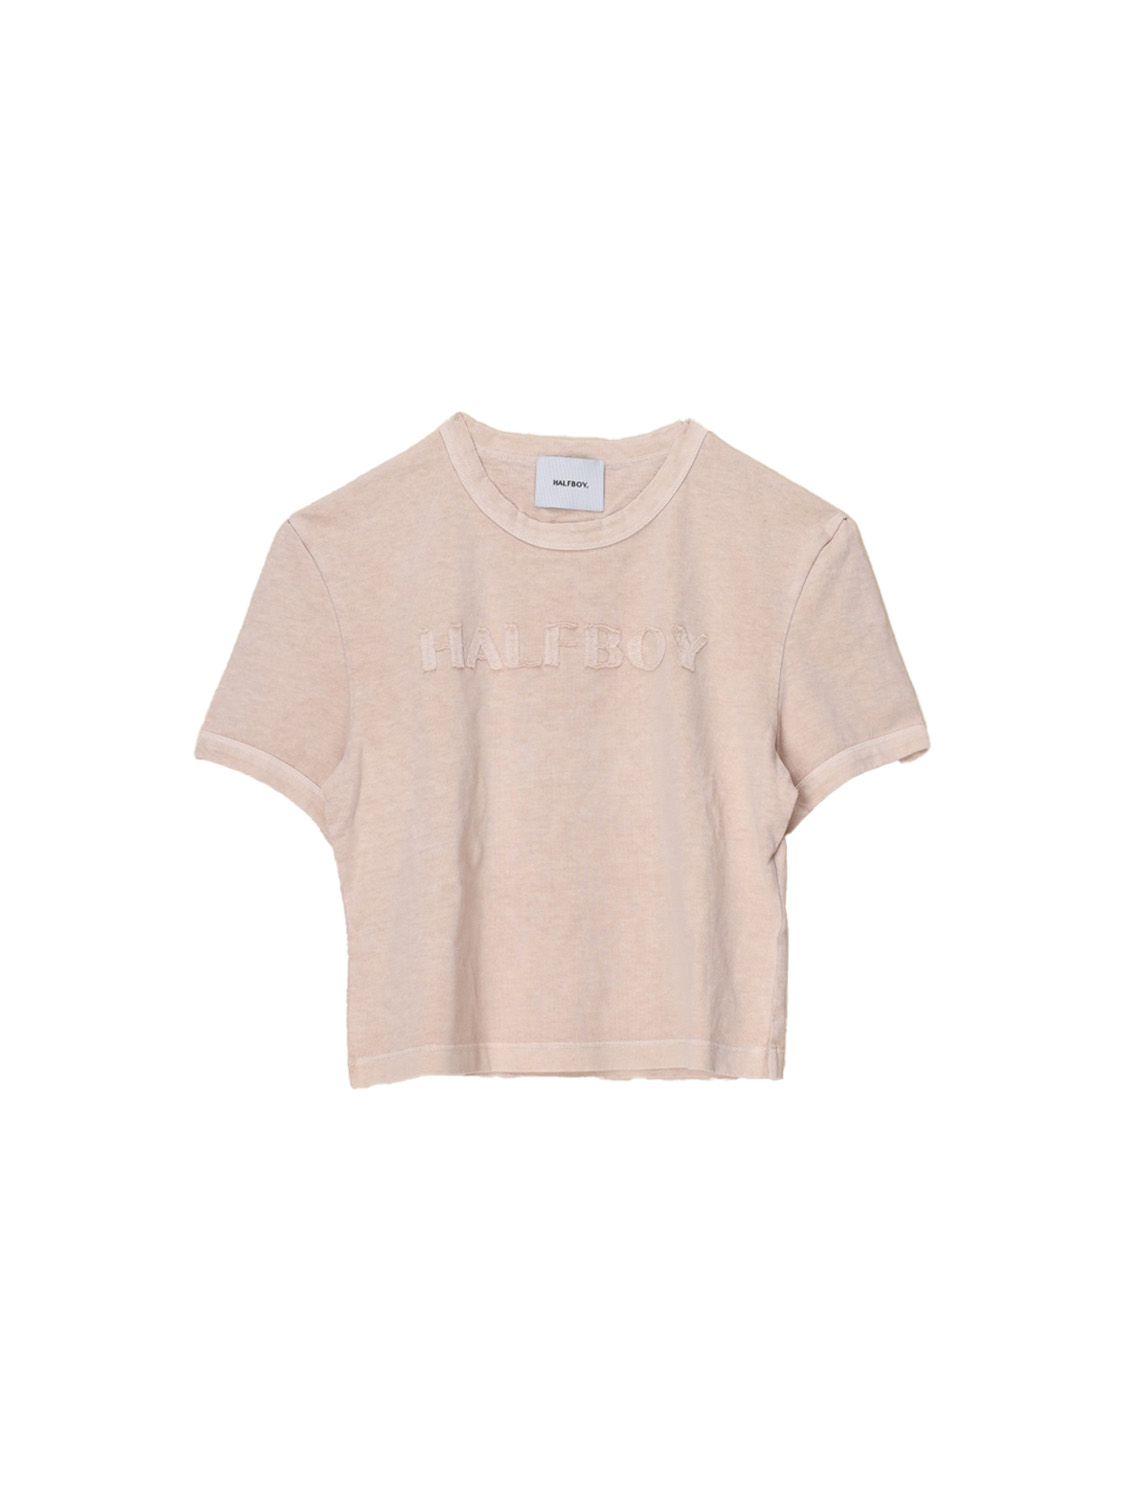 Baby Tee cotton t-shirt with logo detail 